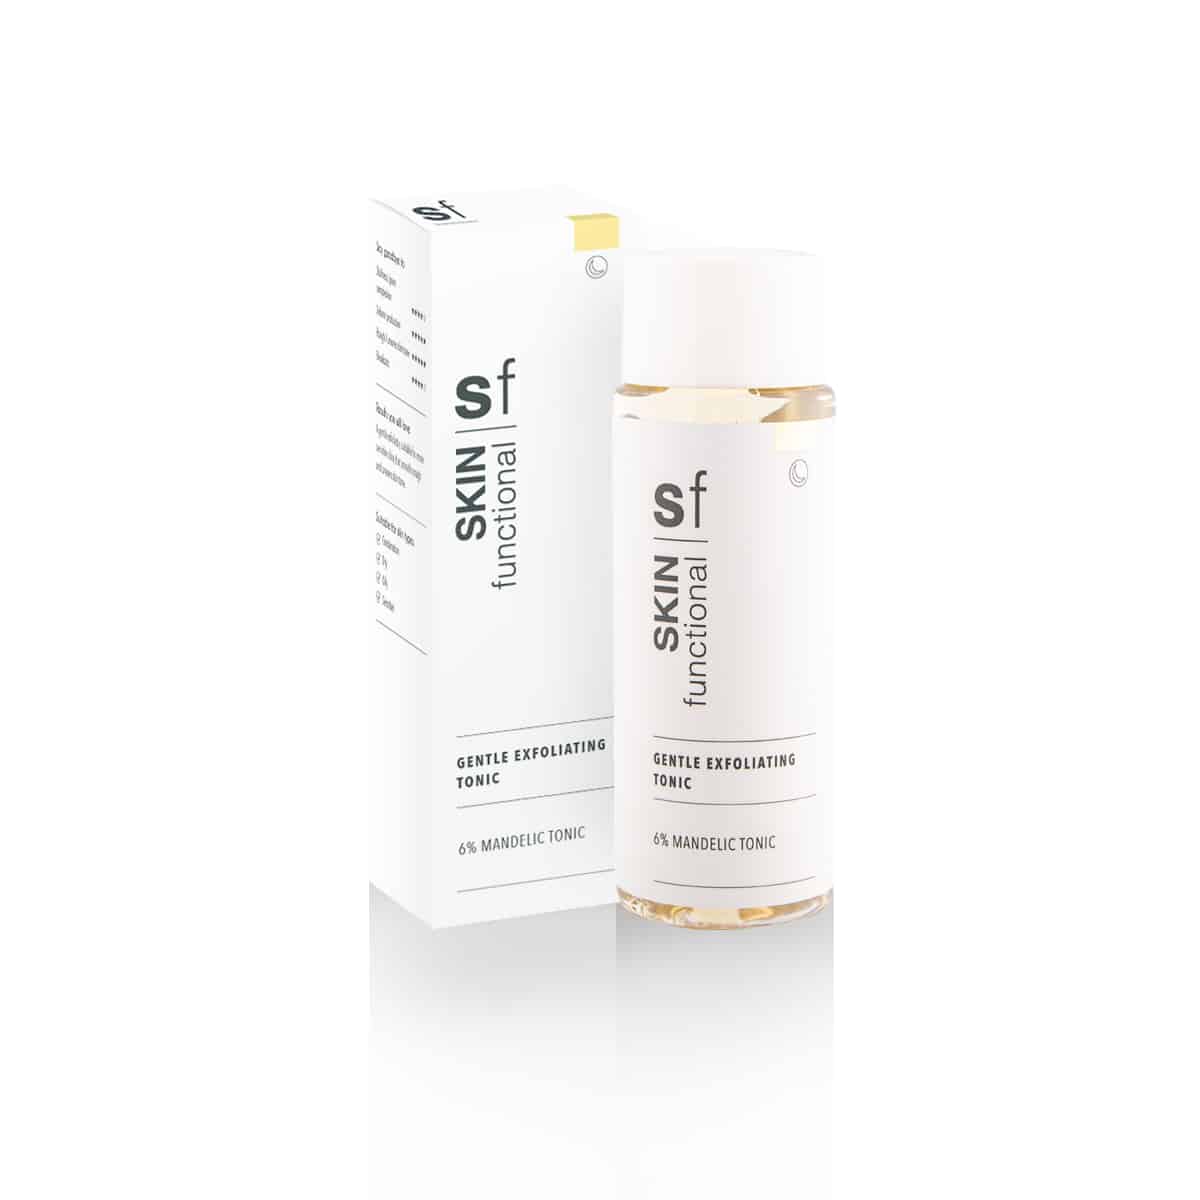 A bottle of skin hydrating serum with SKIN Functional - 6% Mandelic Tonic - Gentle Exfoliating Tonic on a white background.